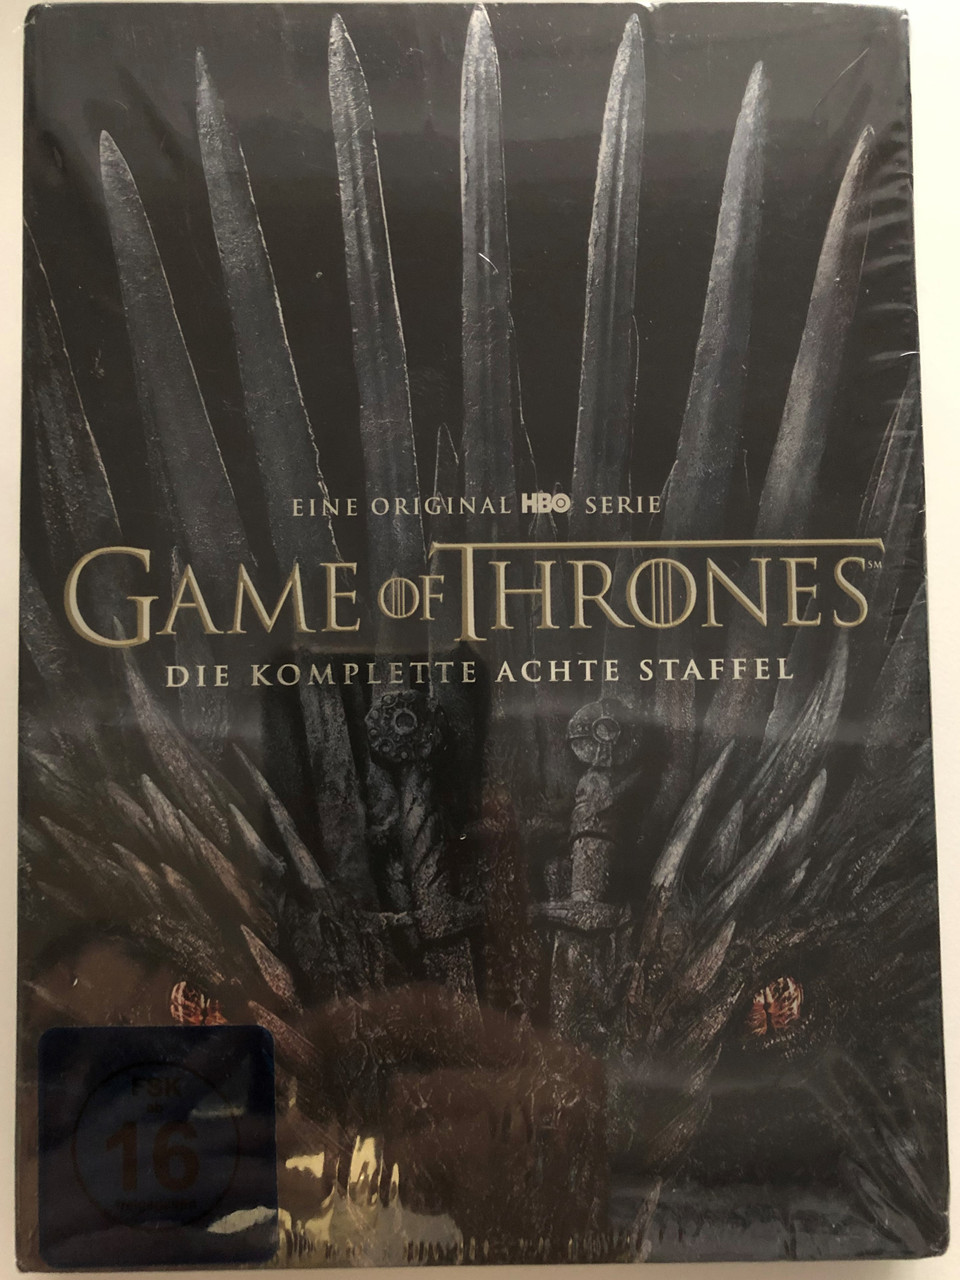 Game of Thrones - The Complete Season 8 DVD Box 4 Discs - German Edition /  Created by David